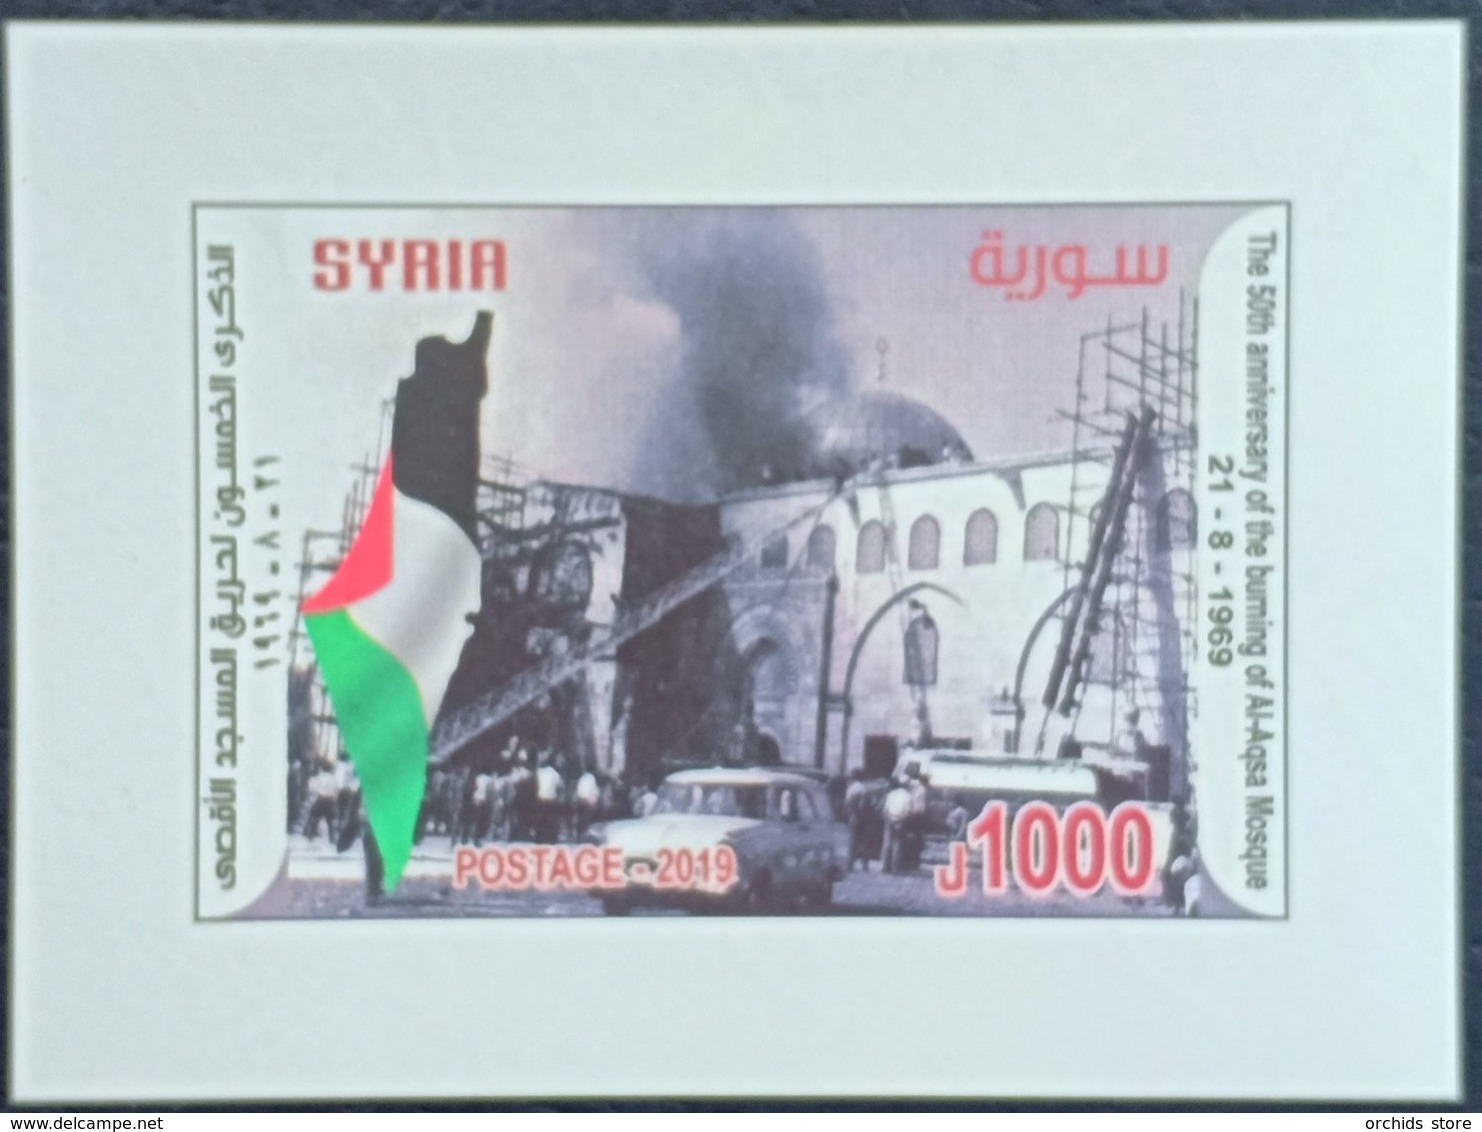 Syria 2019 NEW MNH Block S/S - Al-Quds Jerusalem 50th Anniv Of The Burning Of Al-Aqsa Mosque - Only 1000 Issued - Syria